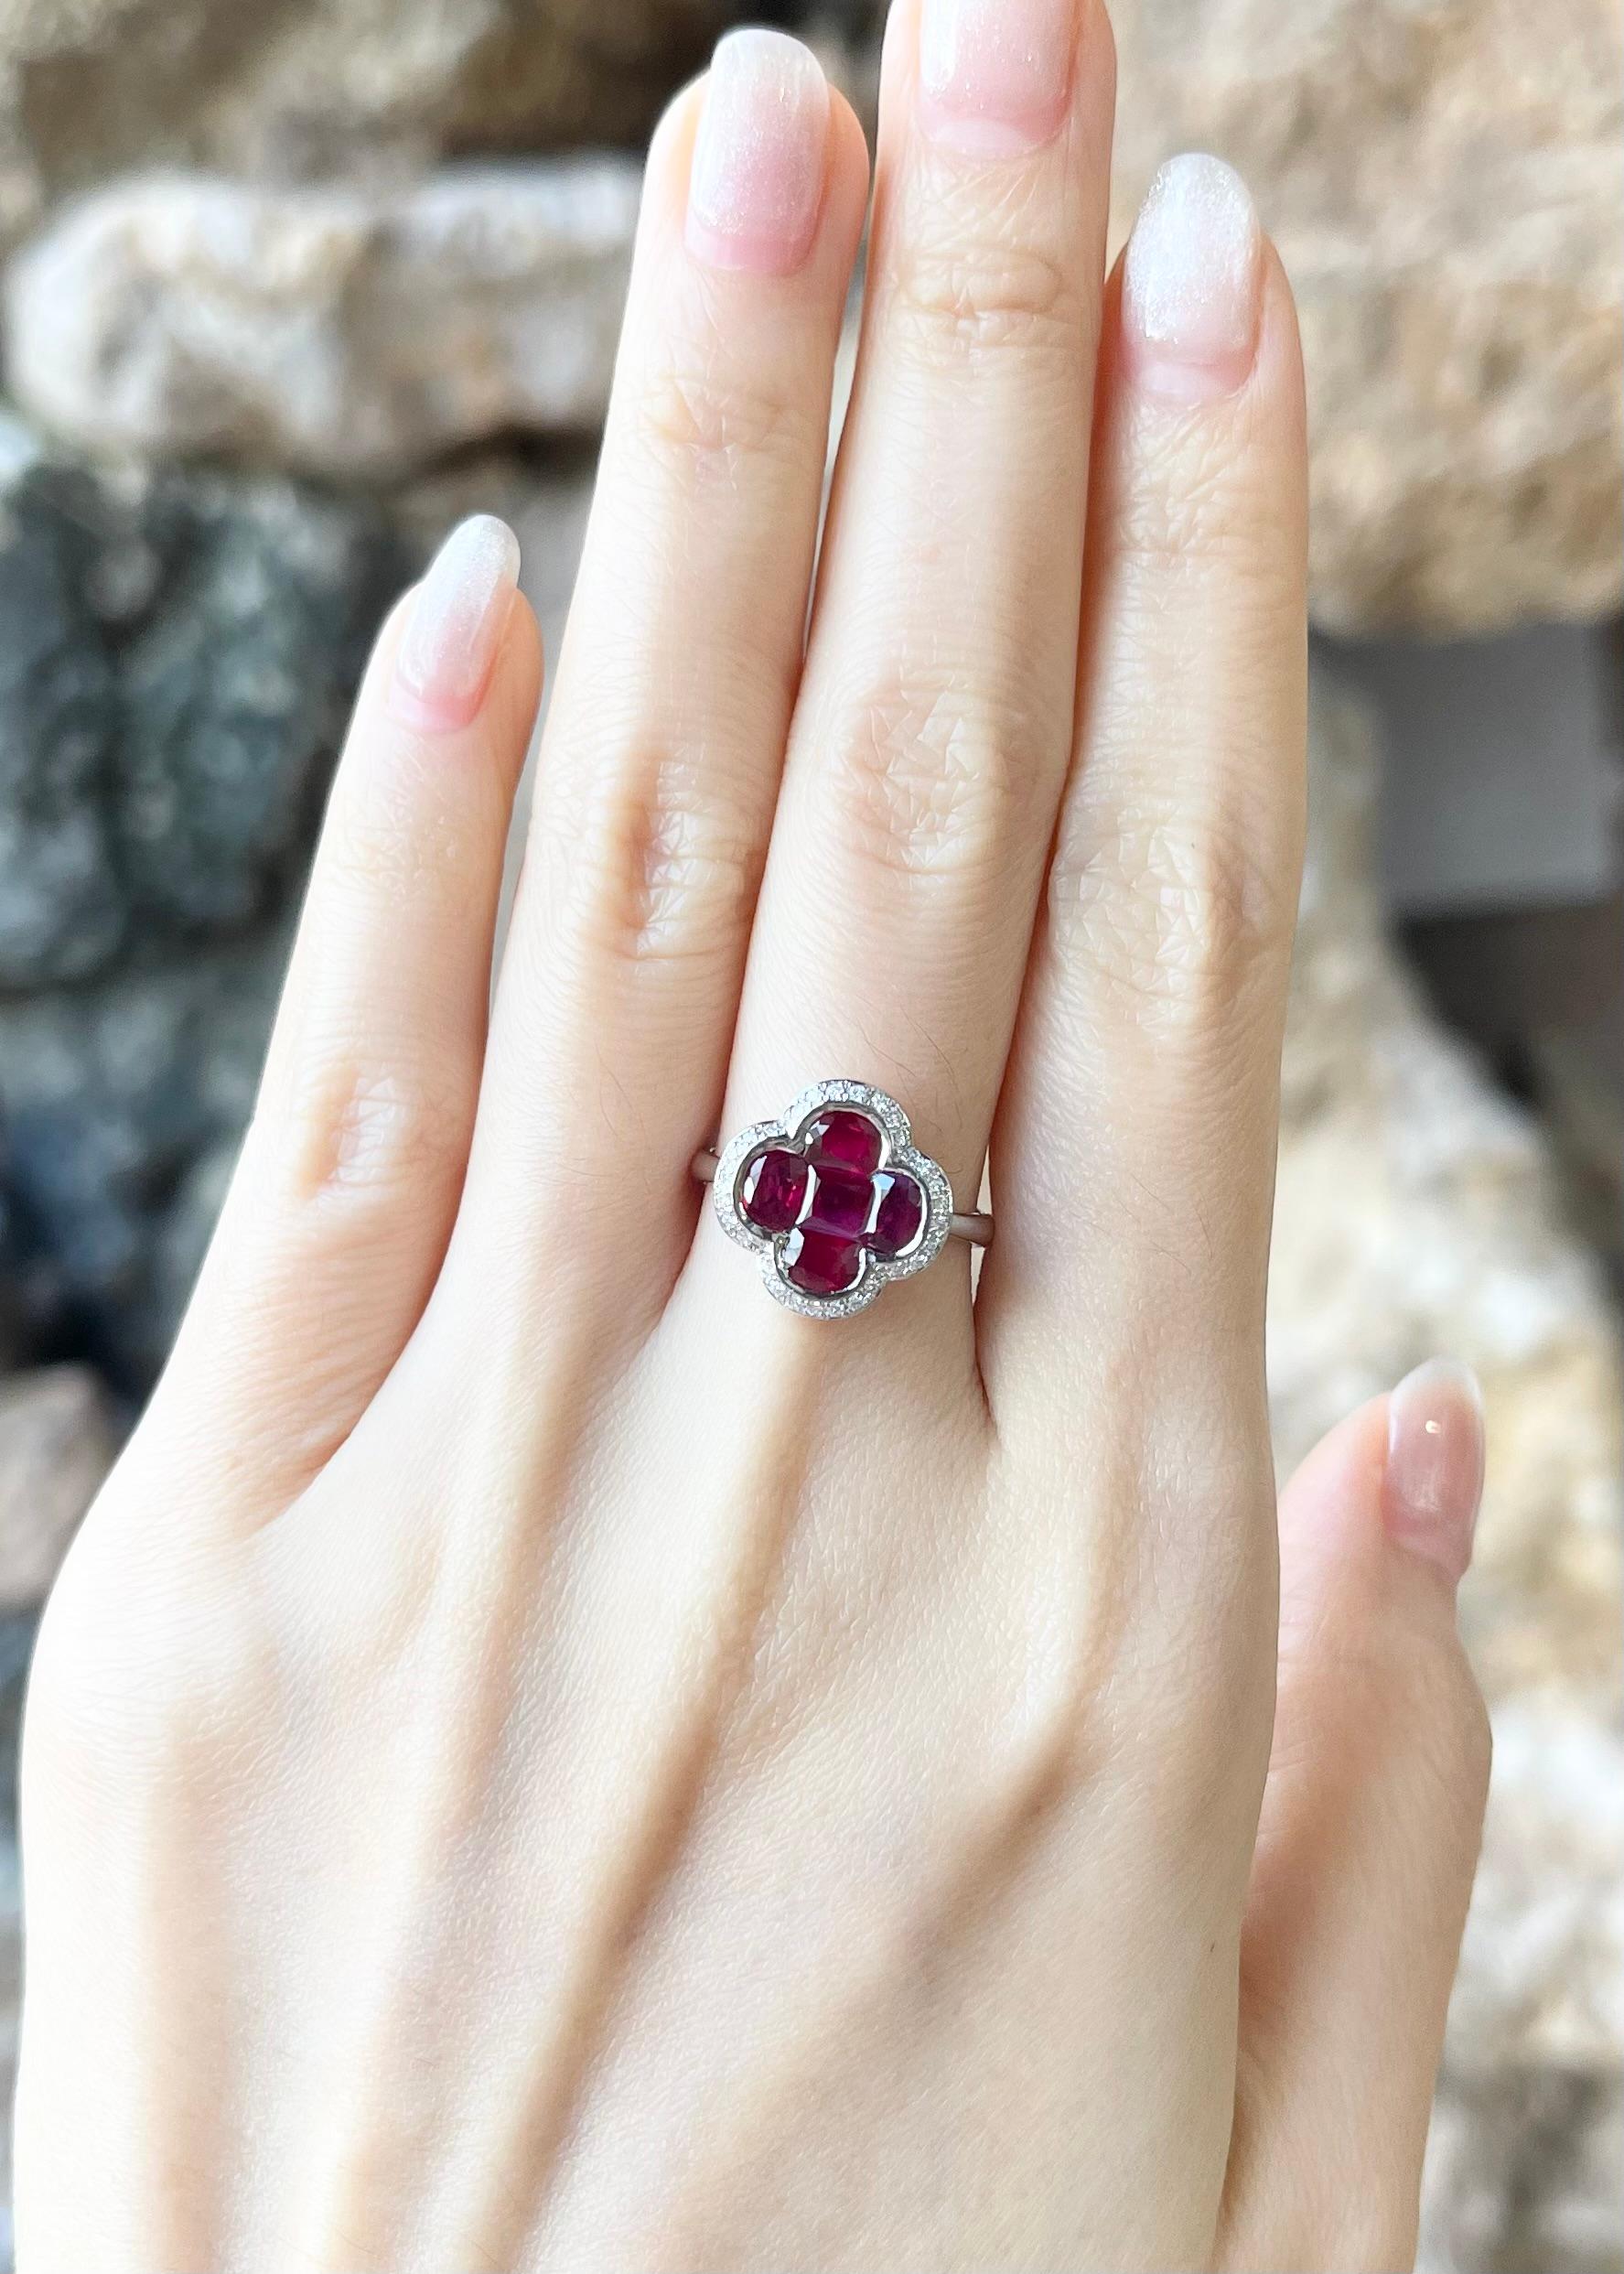 Ruby 1.45 carats with Diamond 0.10 carat Ring set in 18K White Gold Settings

Width:  1.4 cm 
Length: 1.4 cm
Ring Size: 52
Total Weight: 5.63 grams

